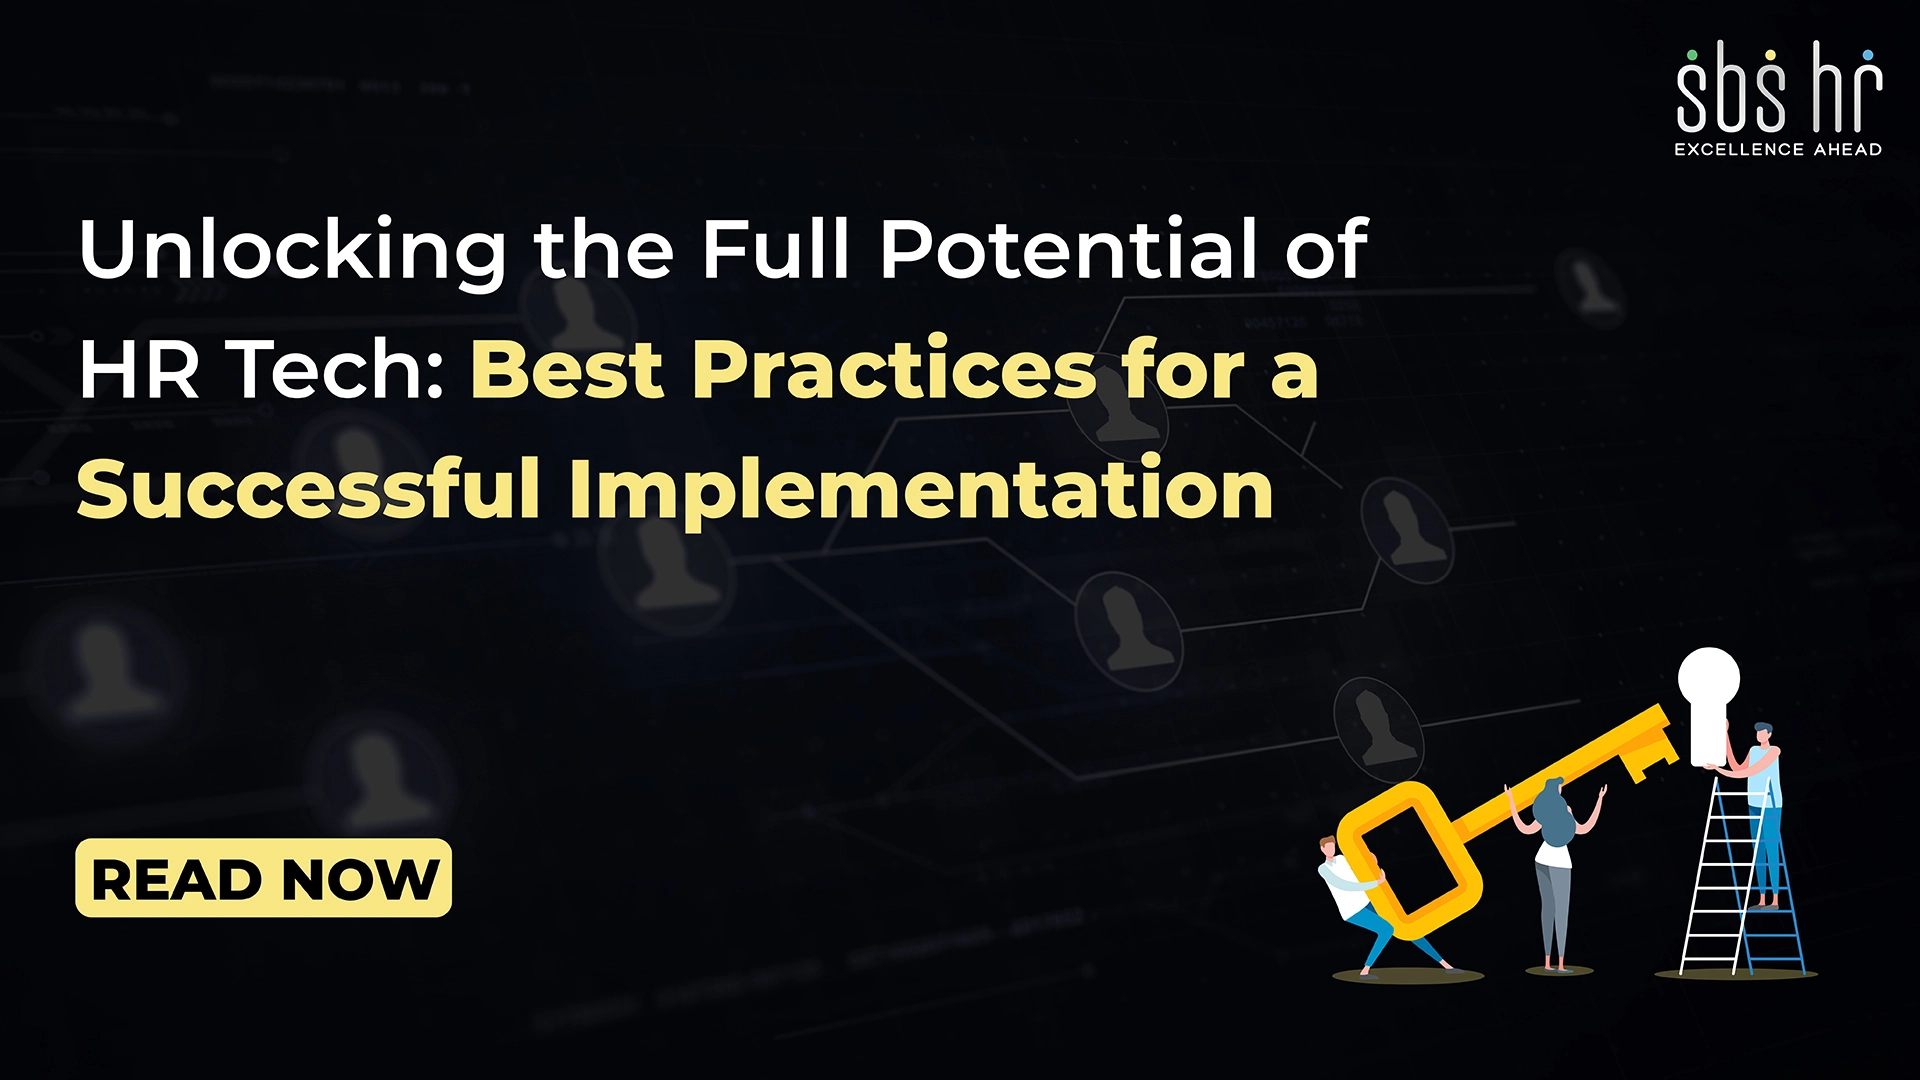 Unlocking the Full Potential of HR Tech Best Practices for a Successful Implementation